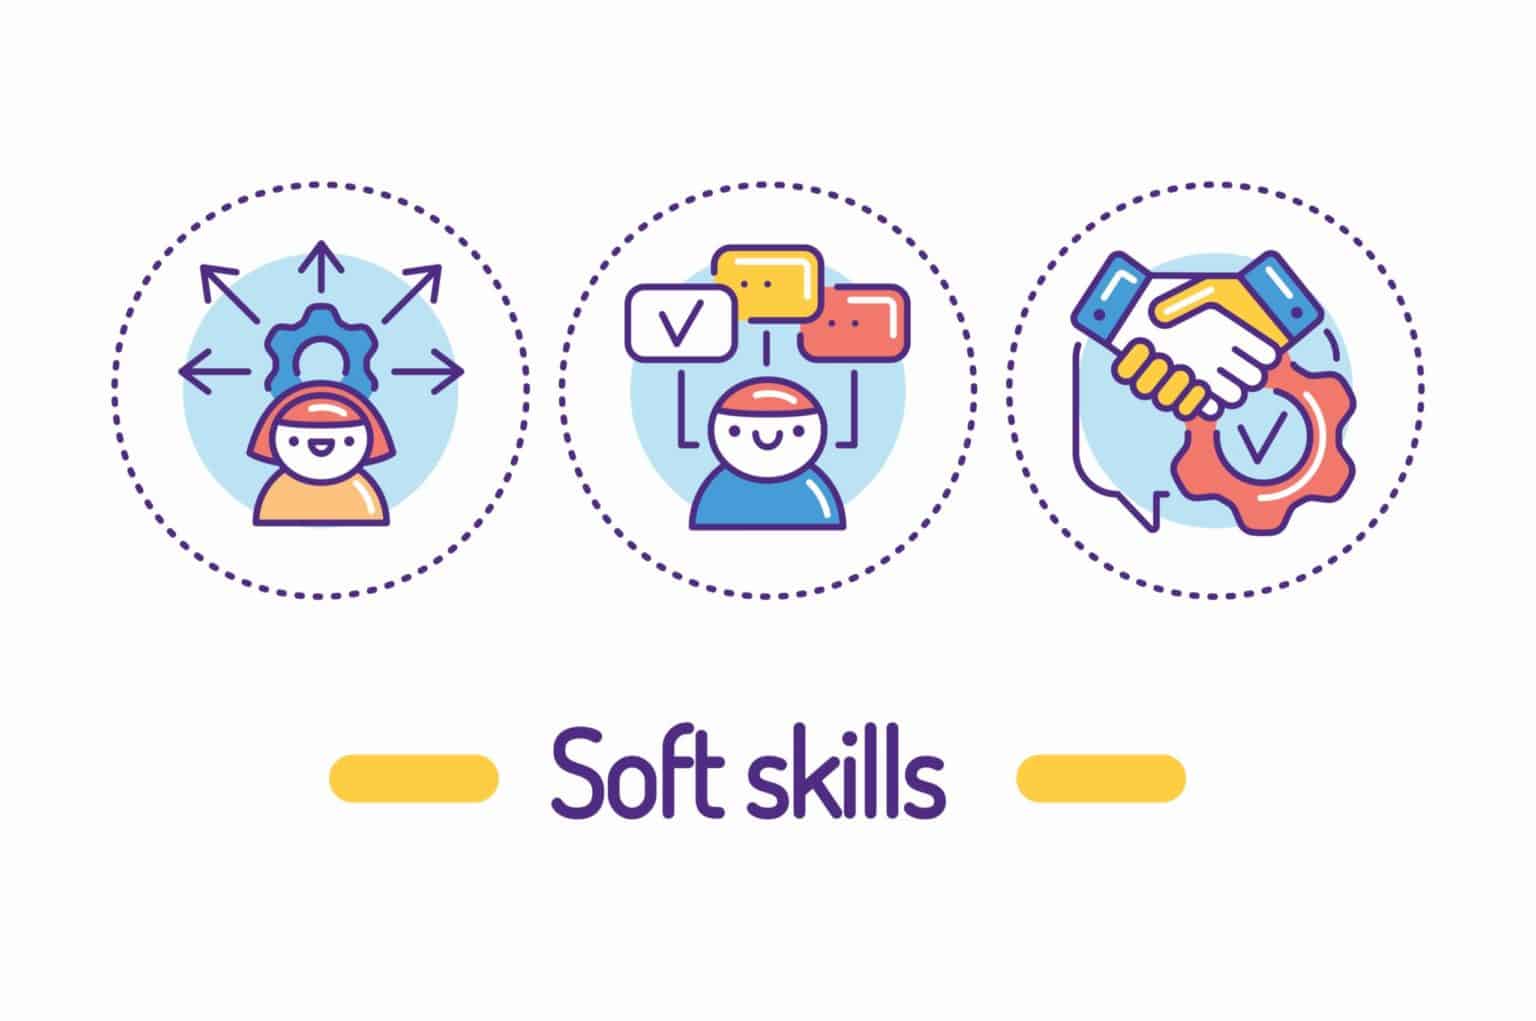 A simple picture with the colors white, yellow, blue, and red that shows the words "soft skills towards the bottom and also shows three circles that demonstrate the results of excellent interpersonal skills training.